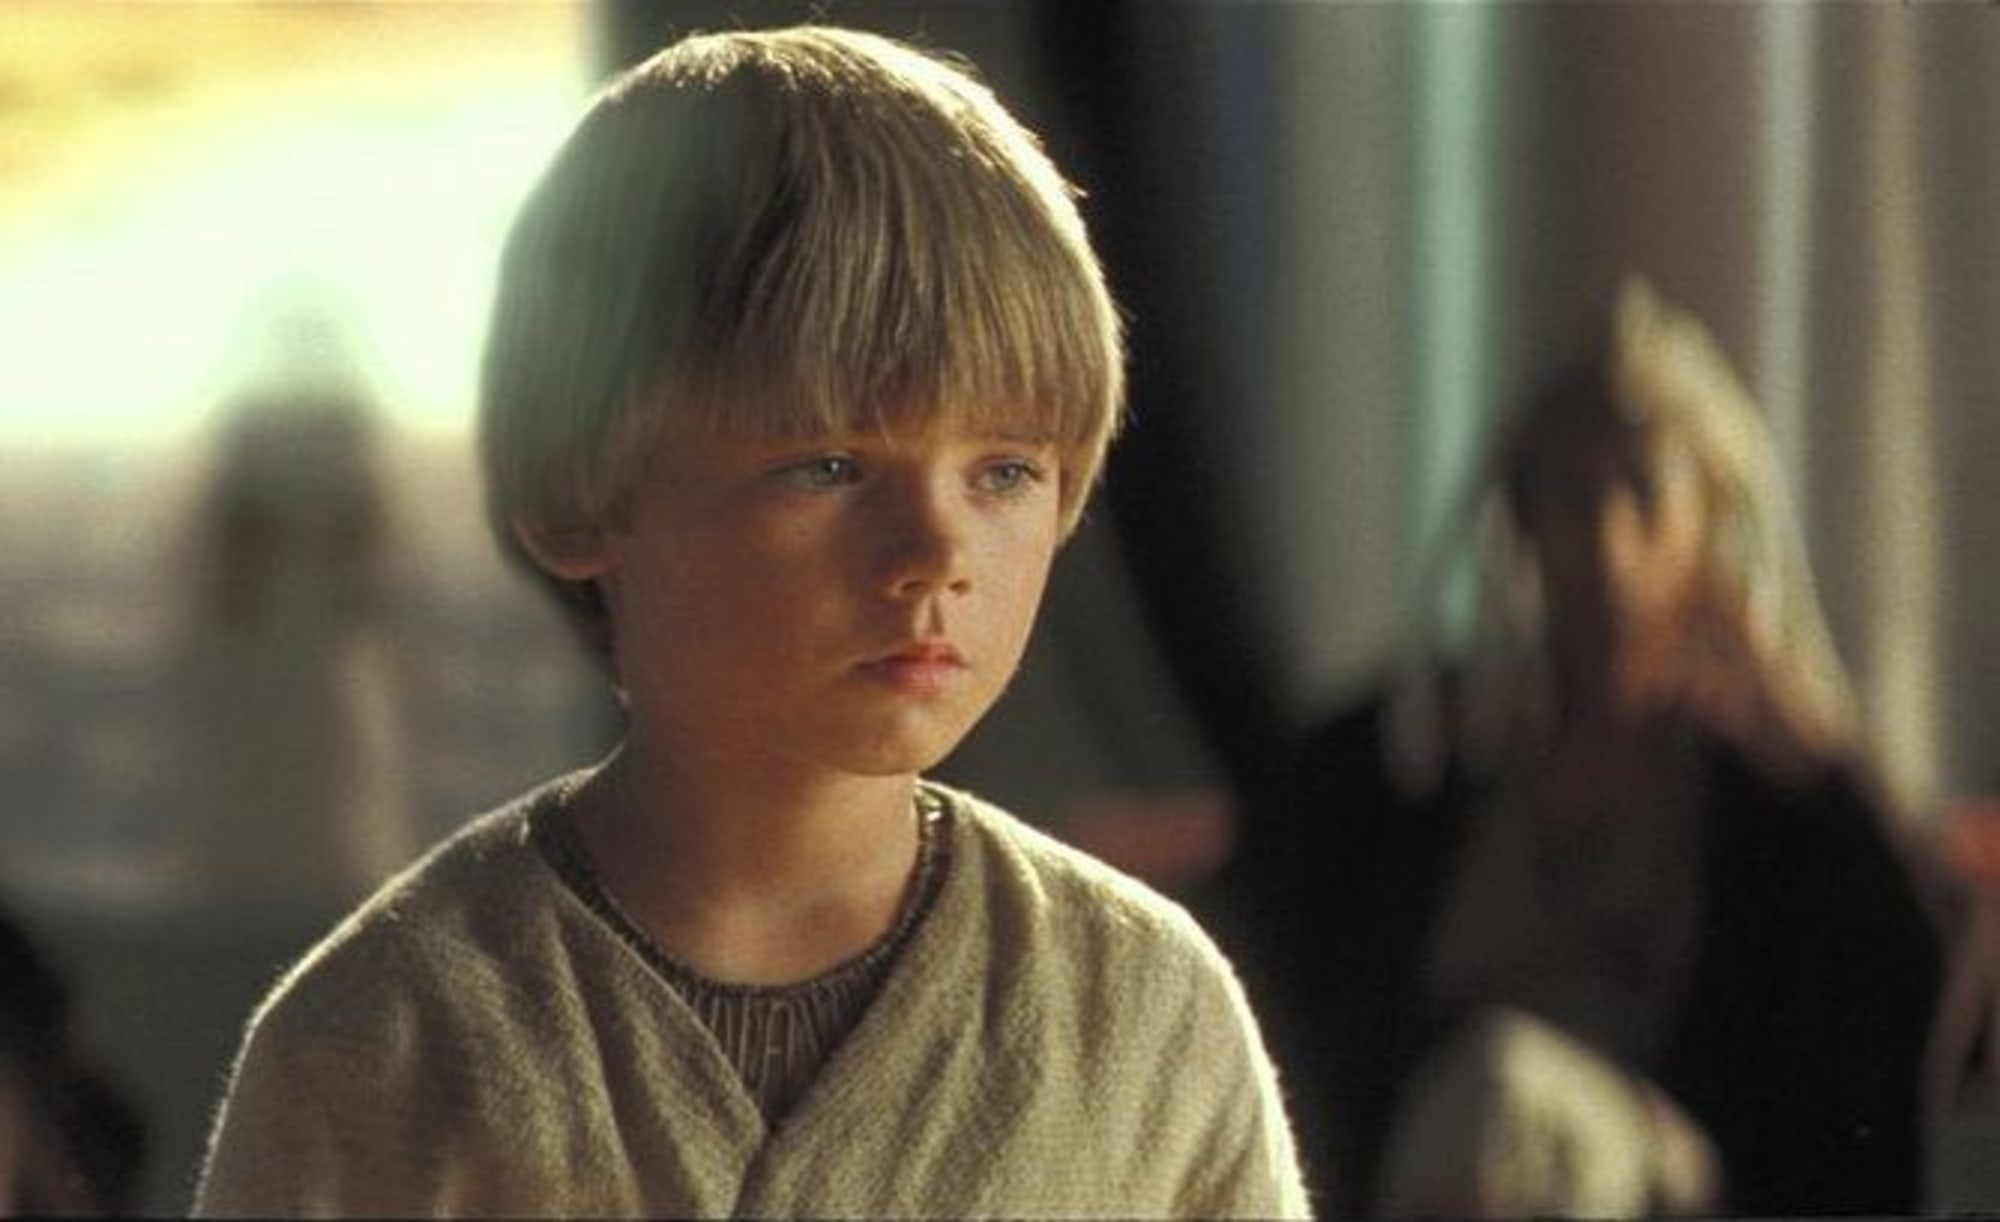 Child Anakin in Council Blank Meme Template